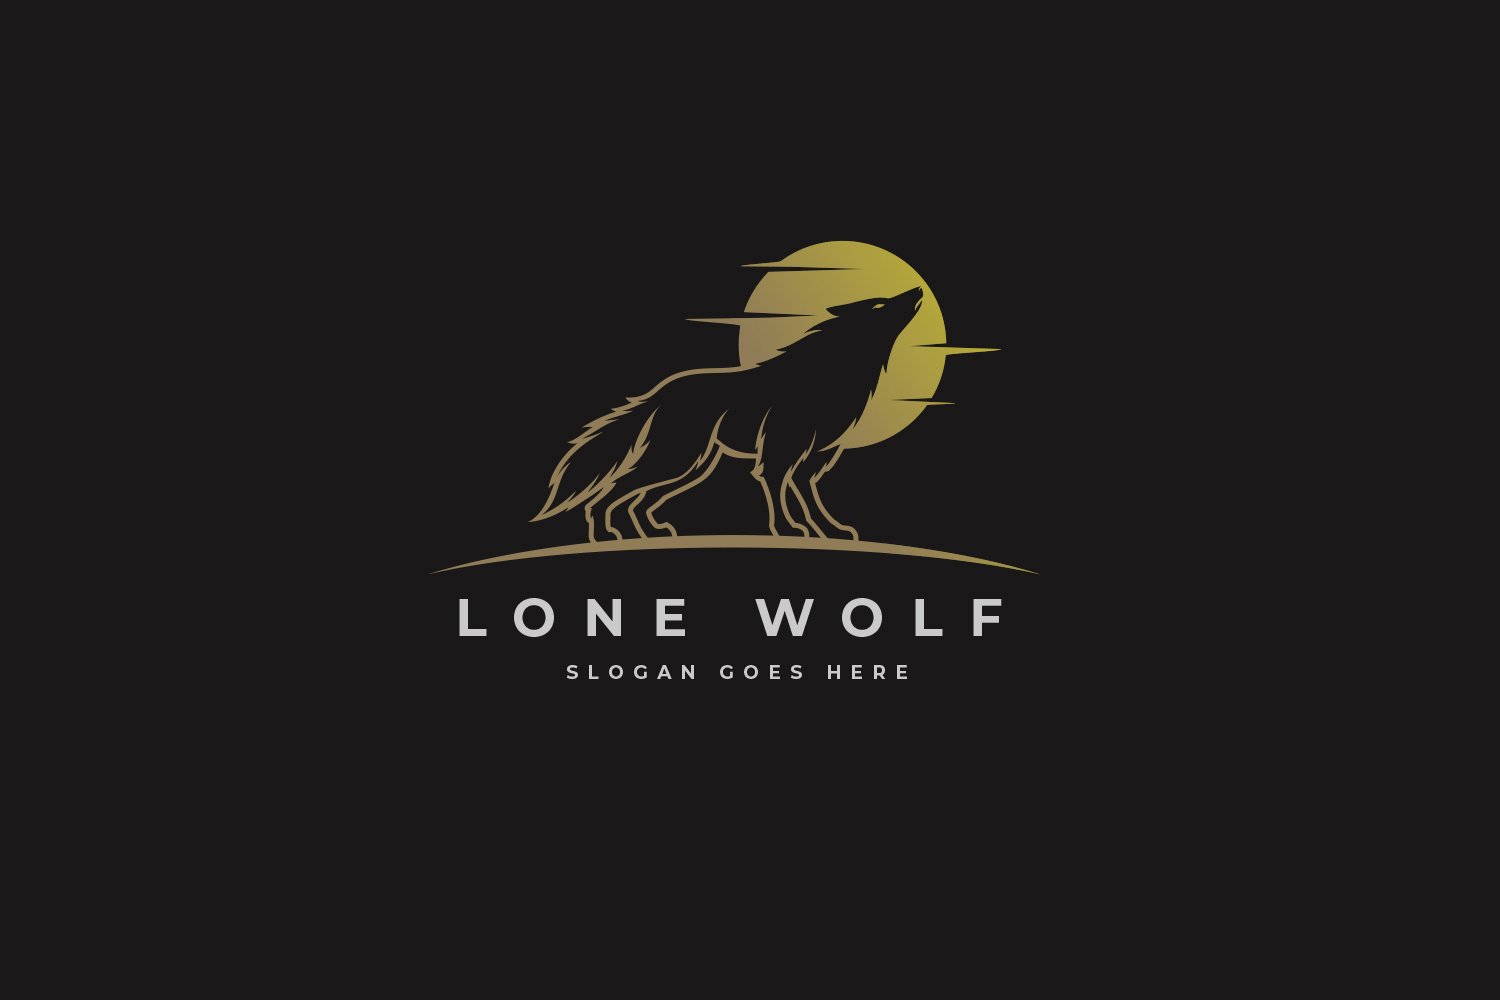 Lone Wolf Logo Design cover image.